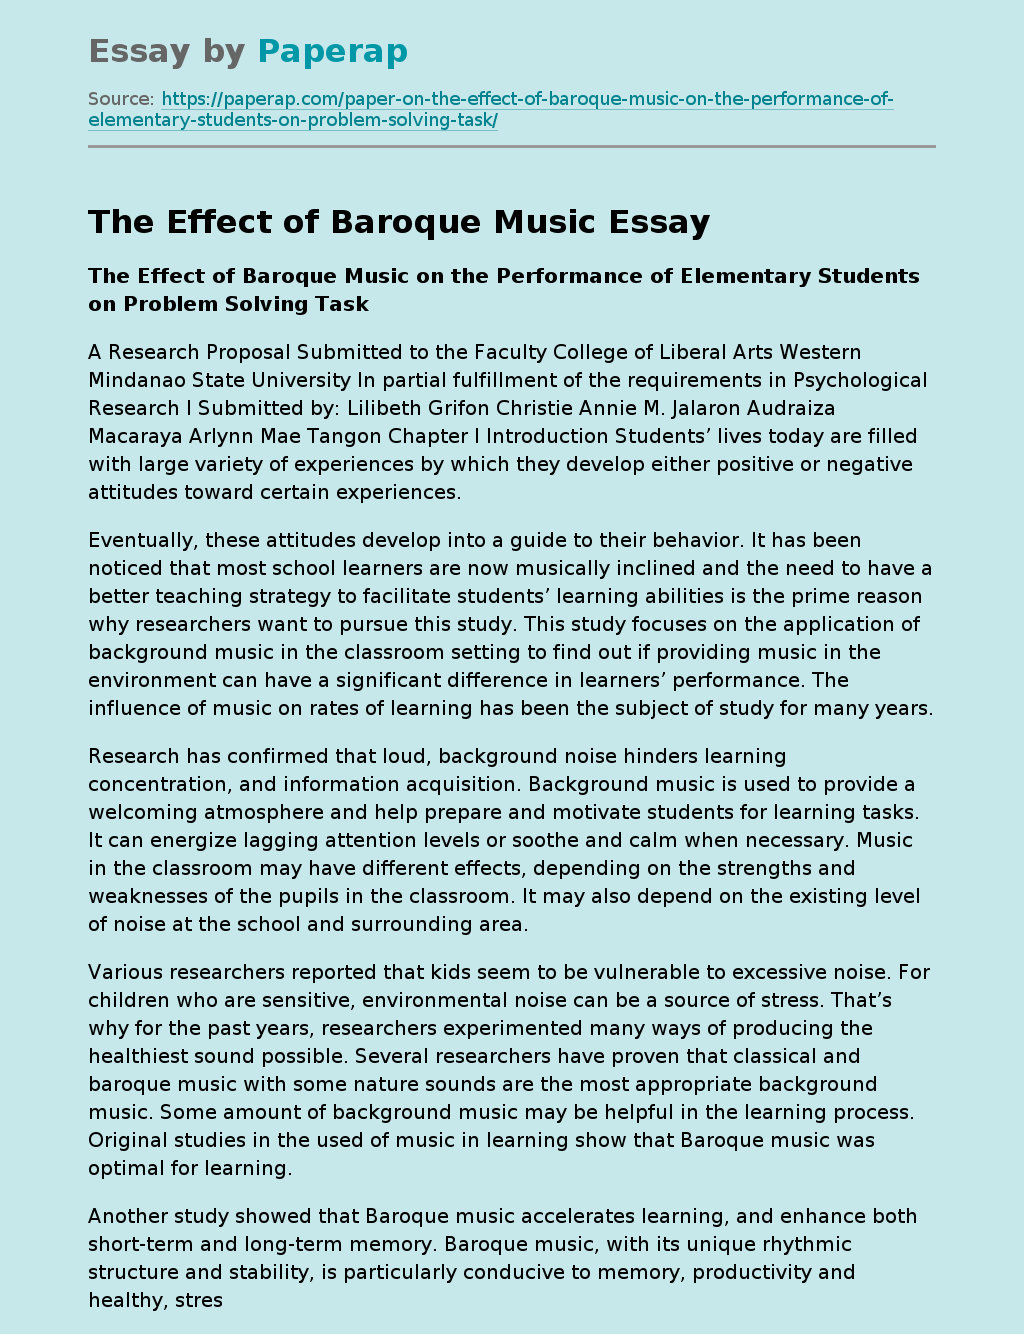 The Effect of Baroque Music